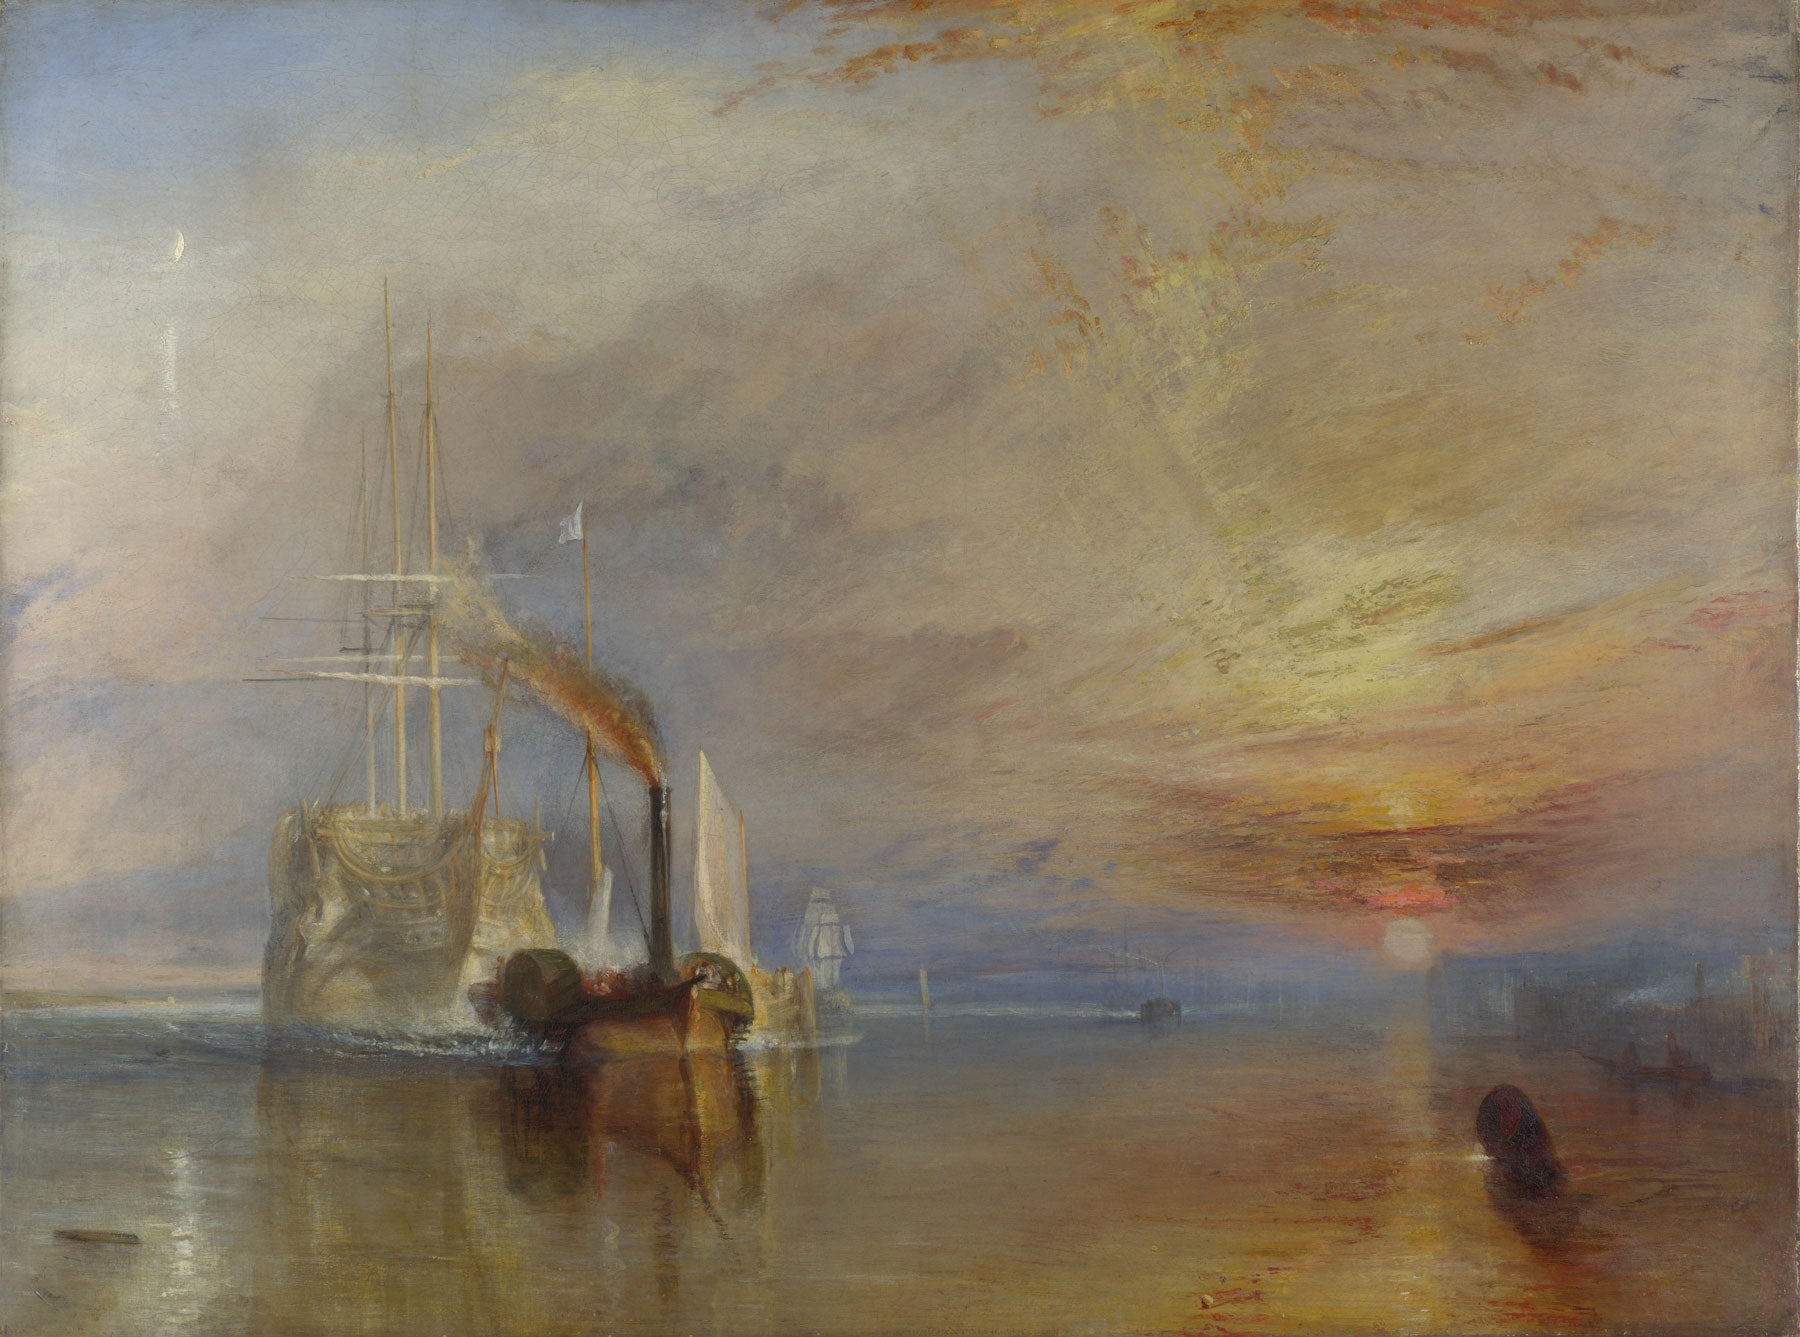 The Fighting Temeraire, by J.W. Turner